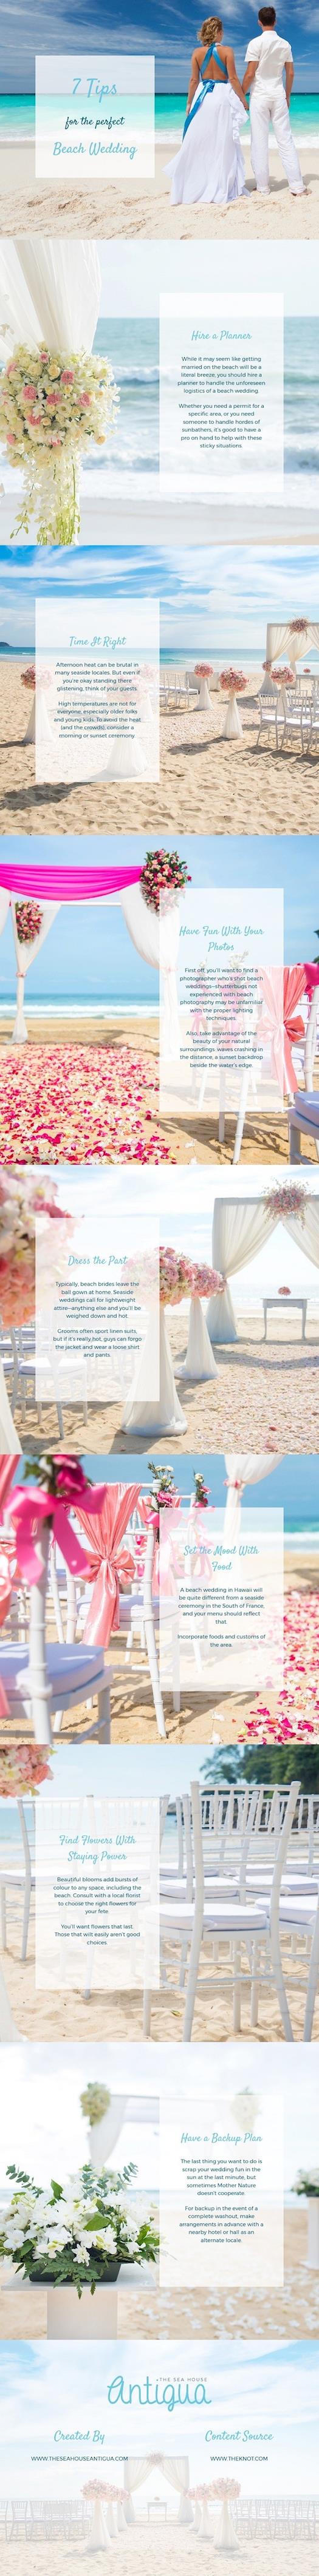  7 Tips for the Perfect Beach Wedding